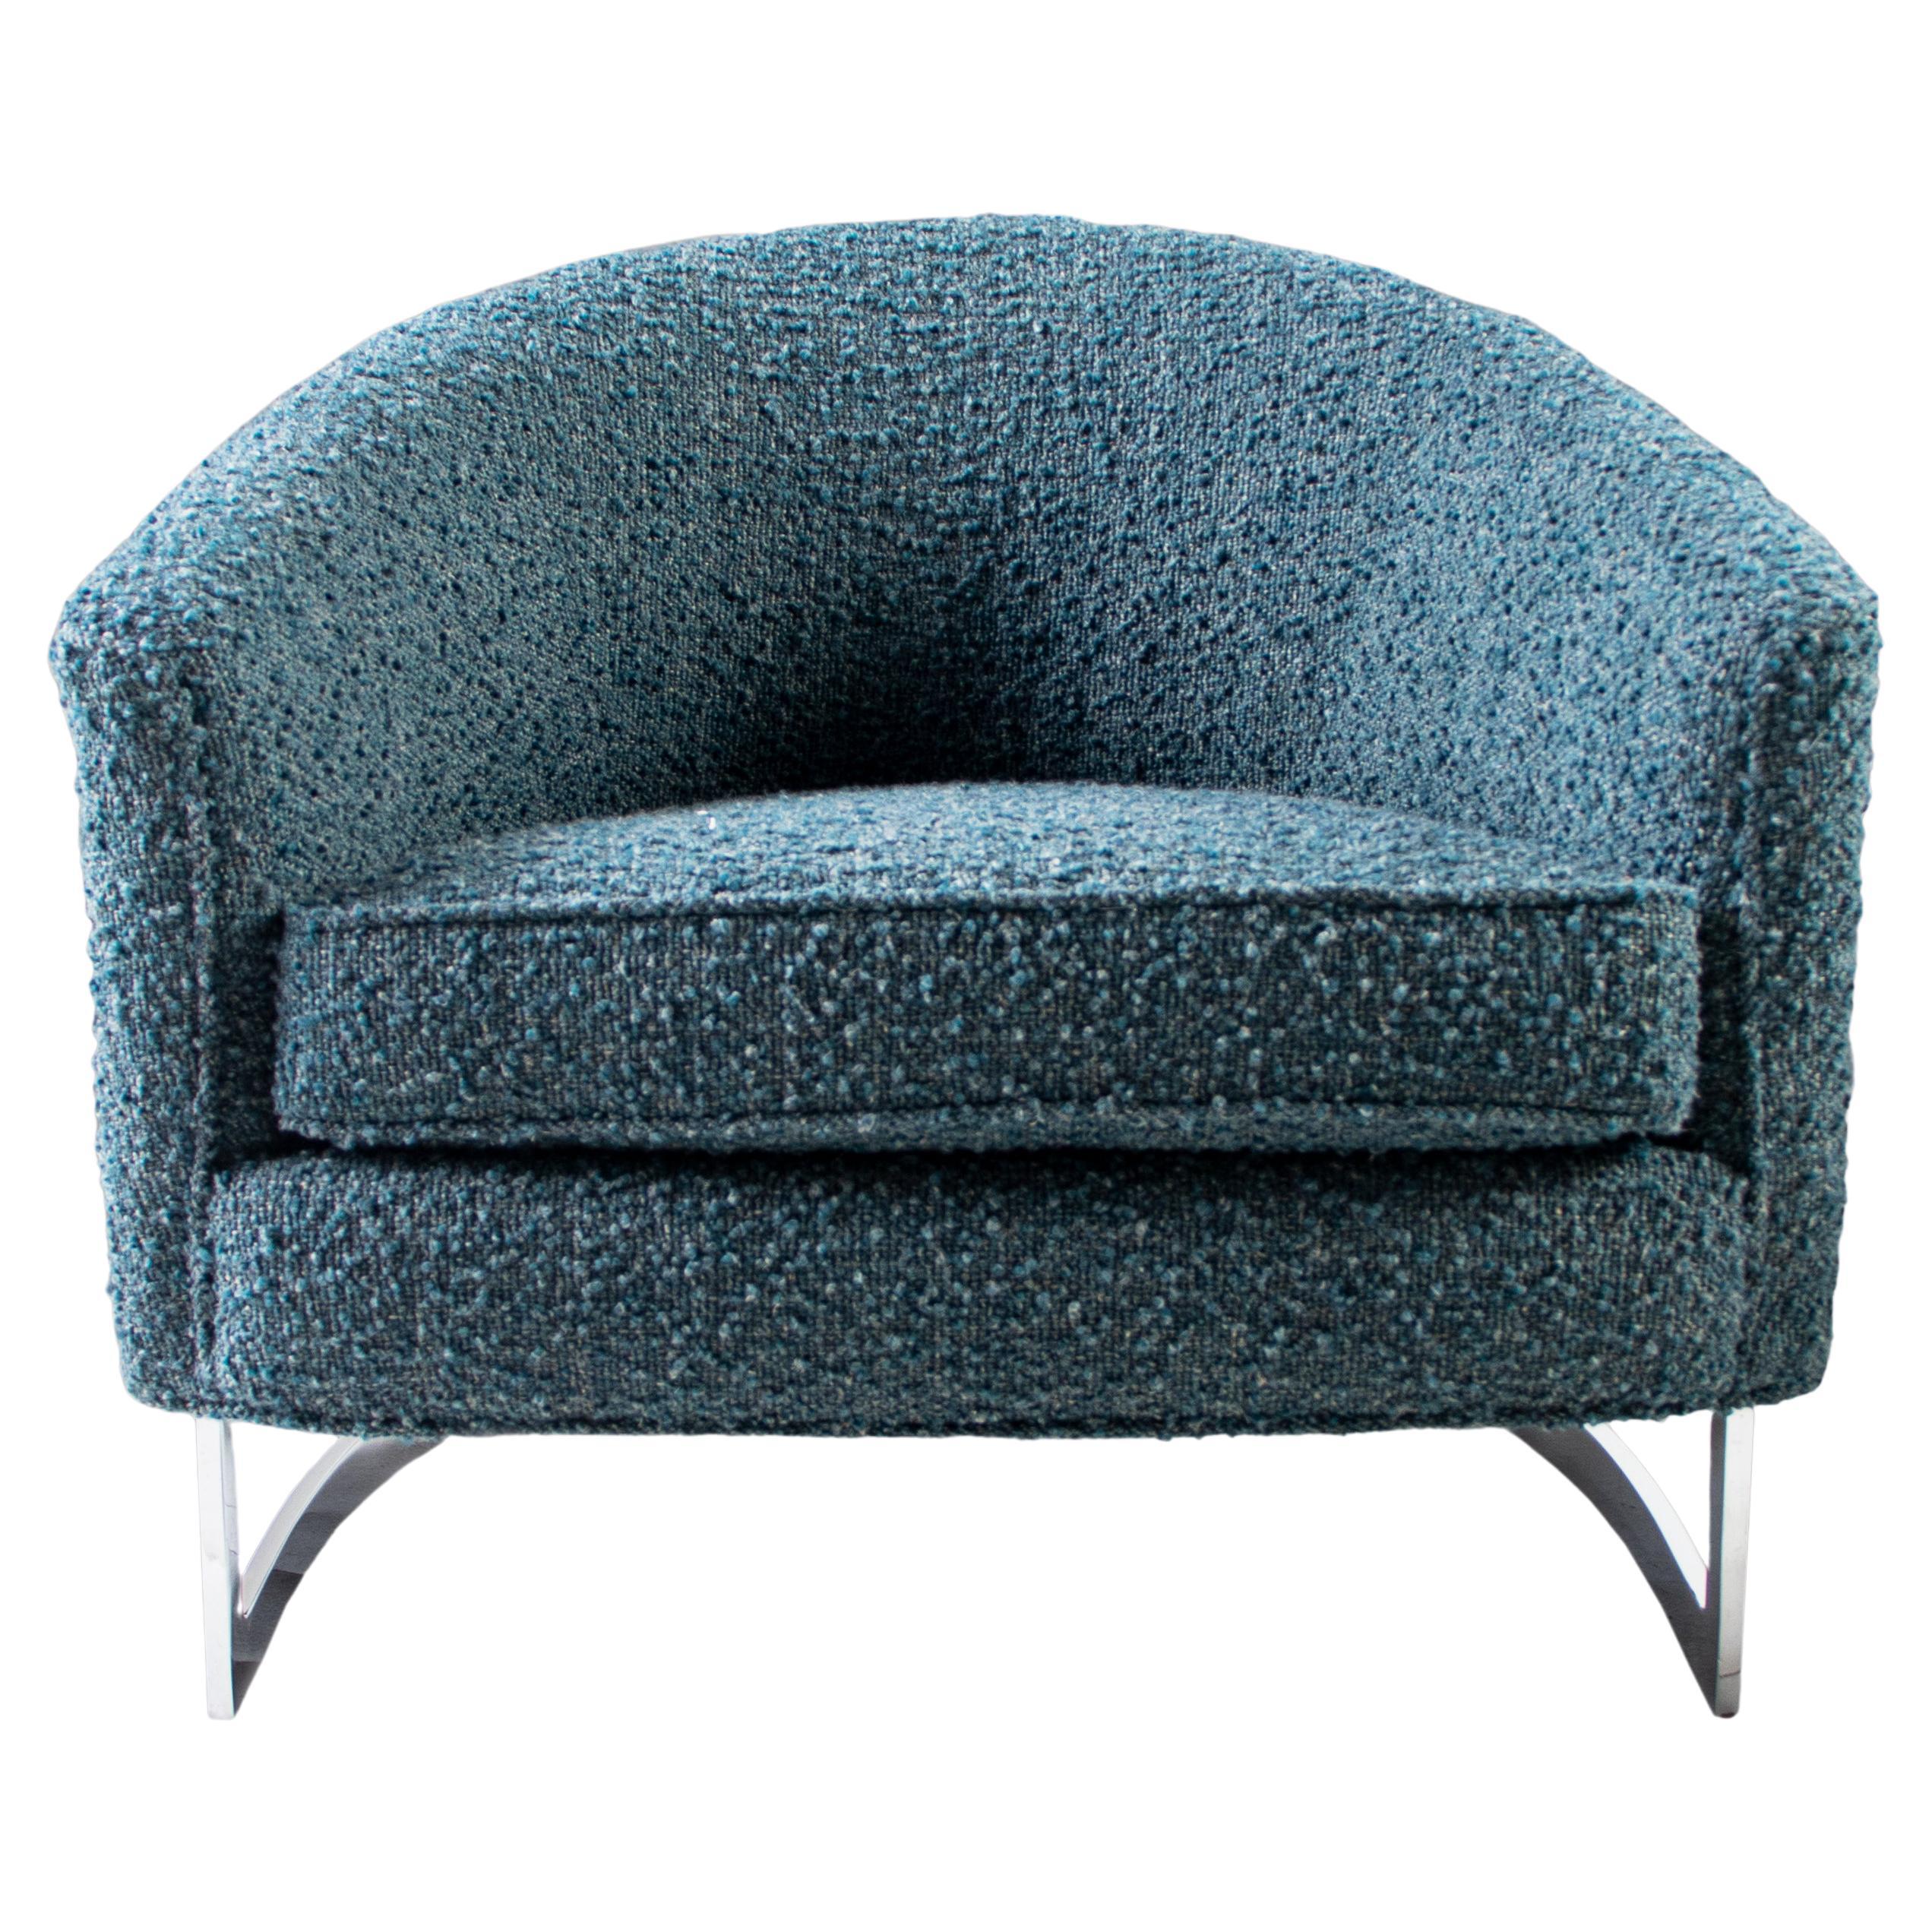 Barrel Back Chairs Upholstered in Italian Boucle